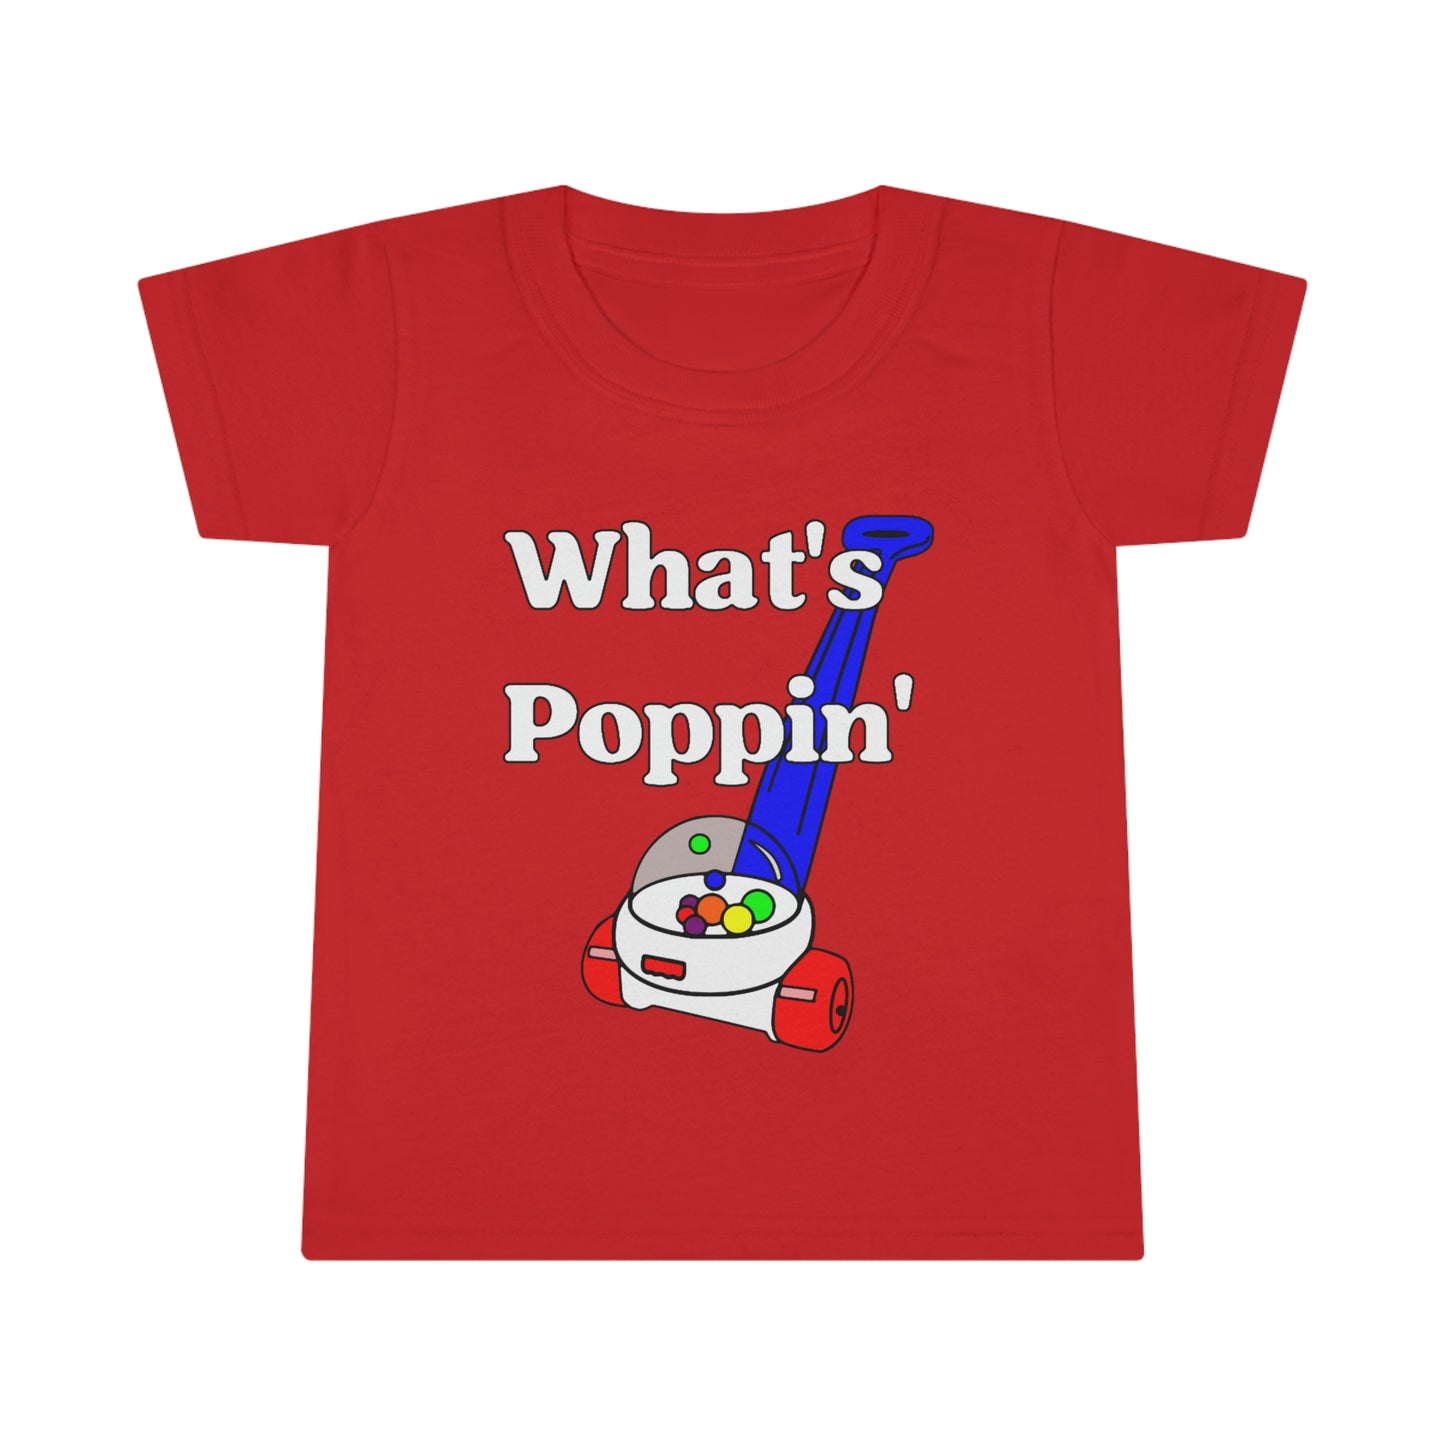 "What's Poppin?" Toddler T-shirt (2T-6T)